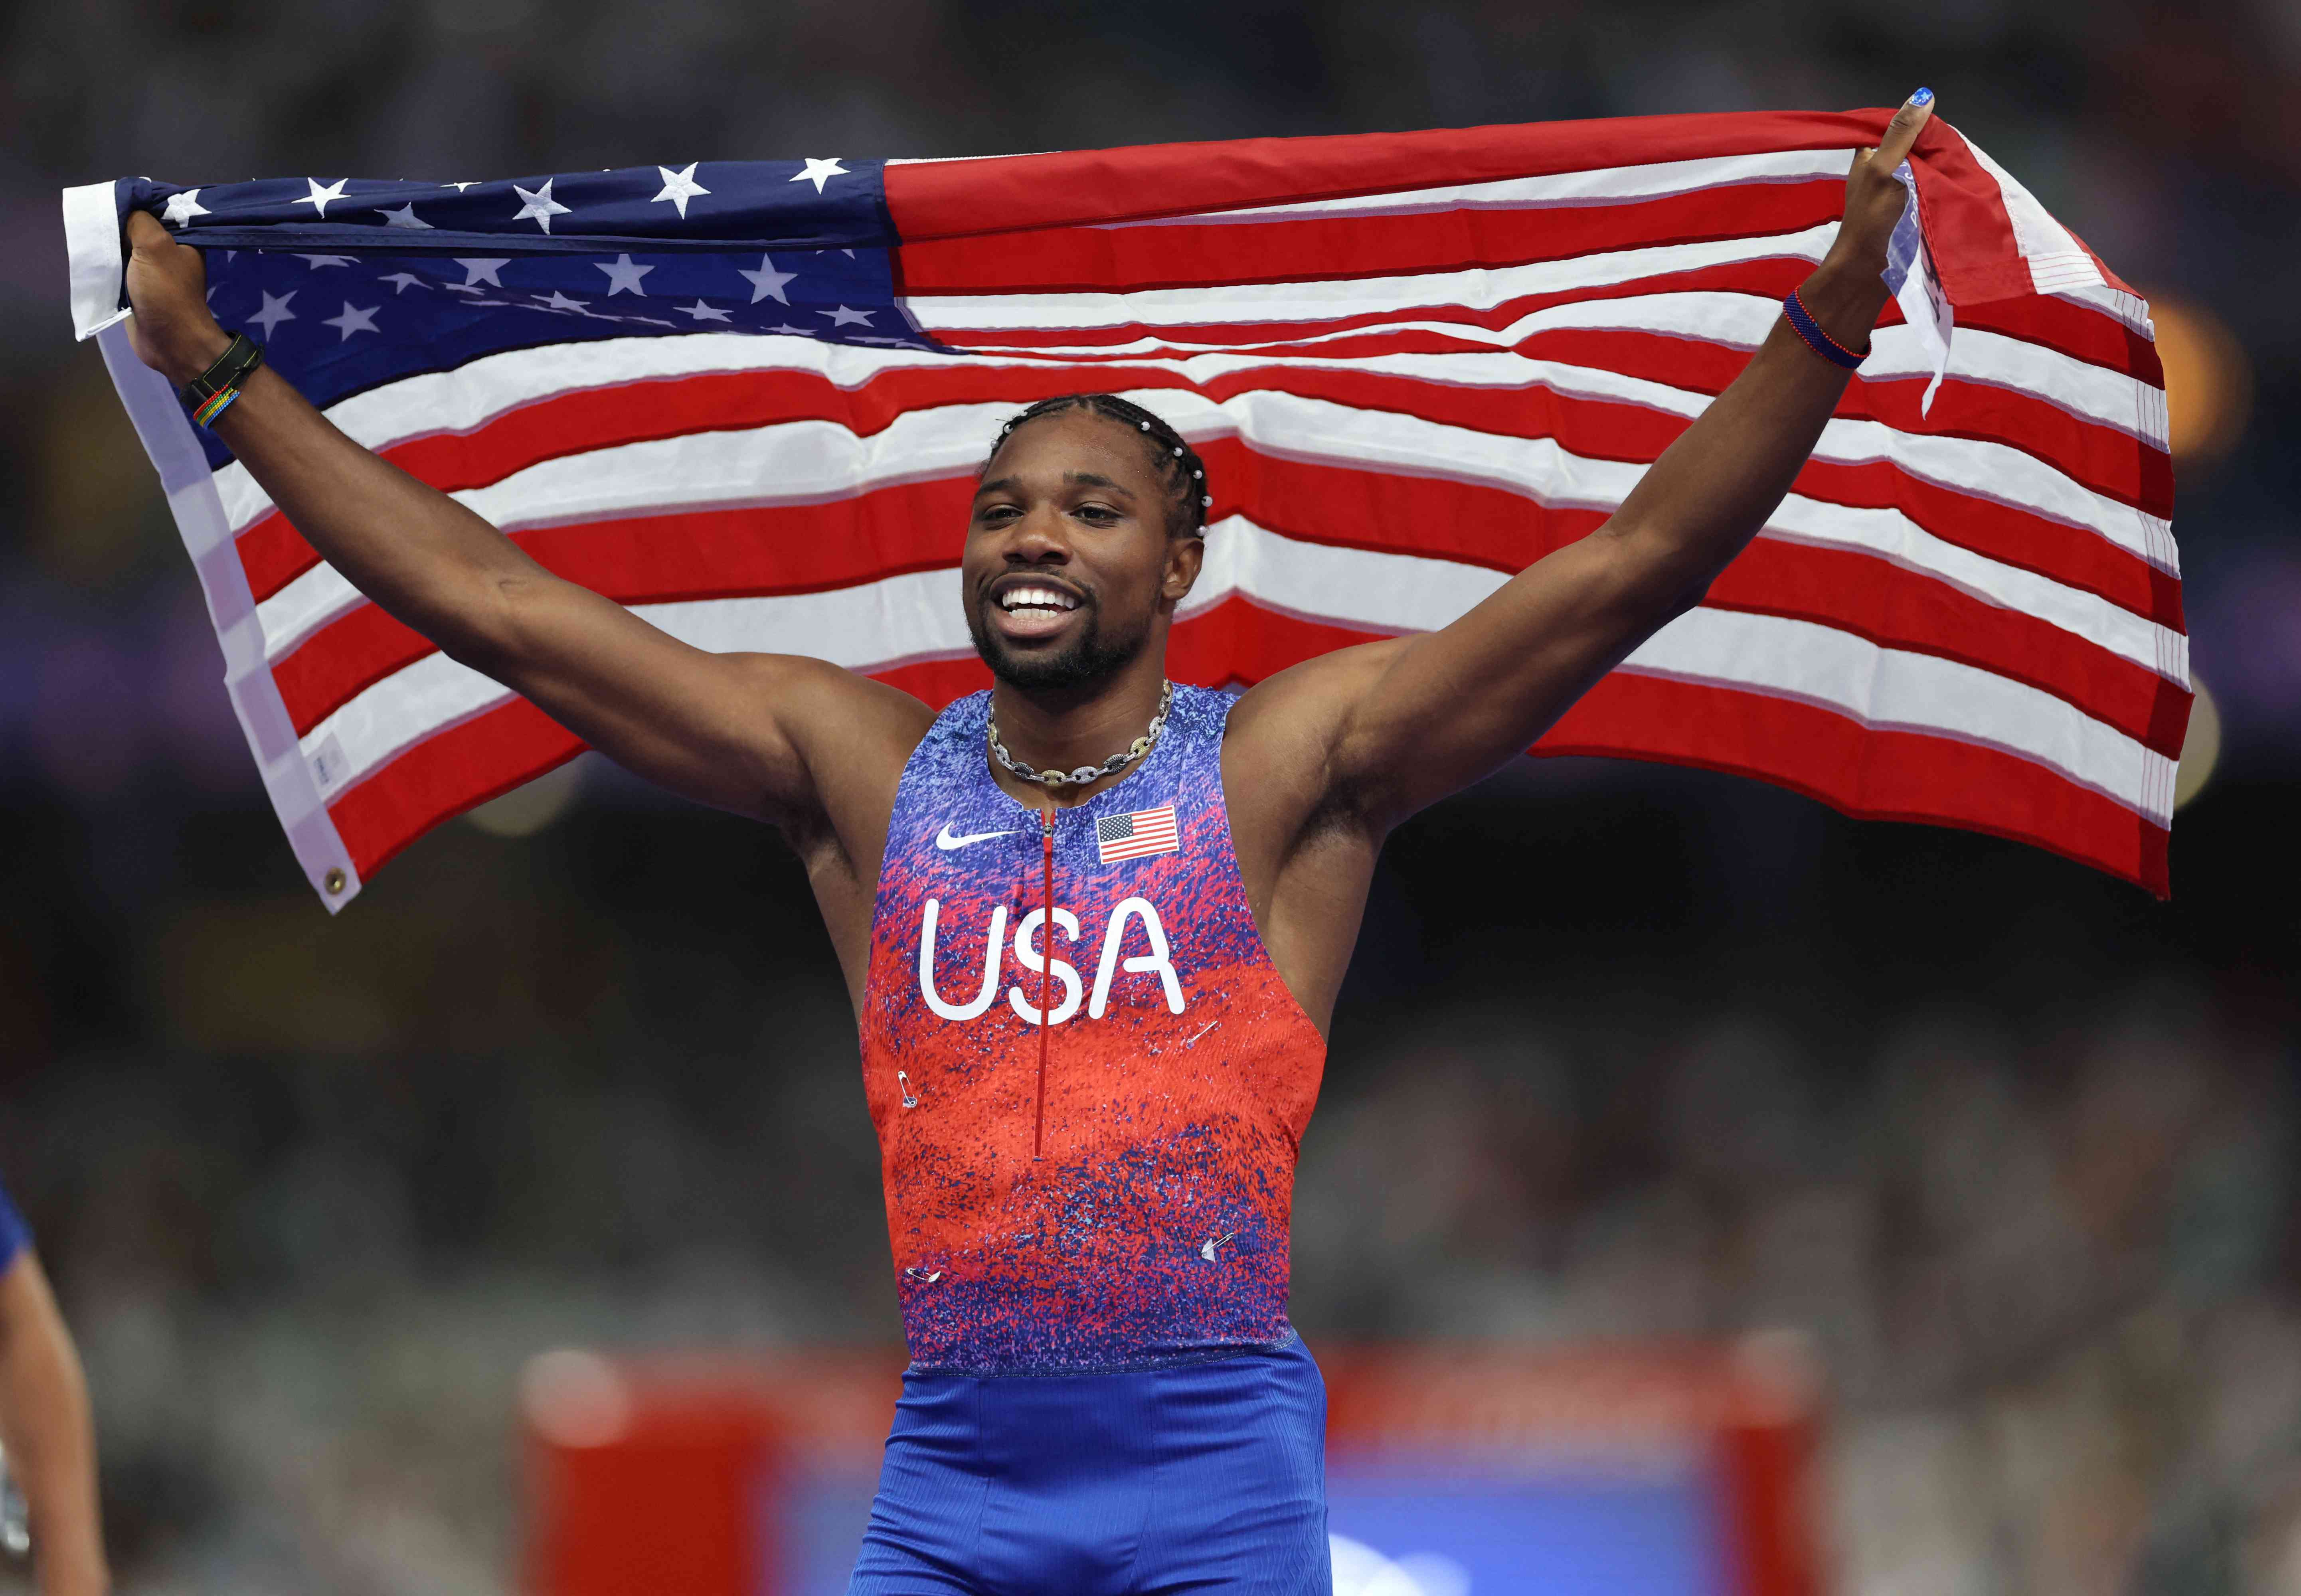 Paris 2024: Lyles wins Olympic 100m gold in closest finish in modern history